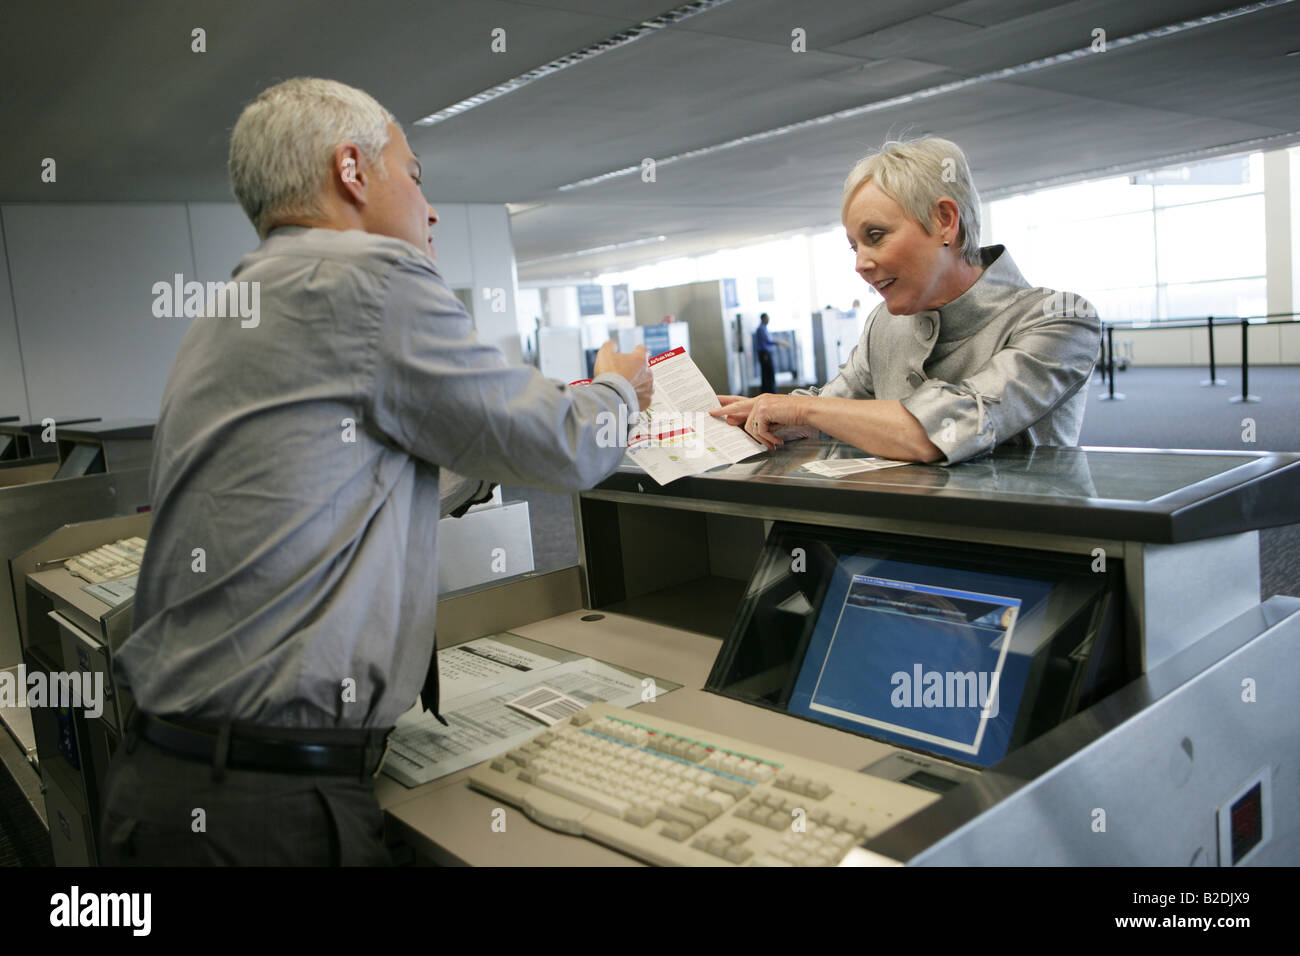 Airport attendant showing passenger brochure at check in counter. Stock Photo